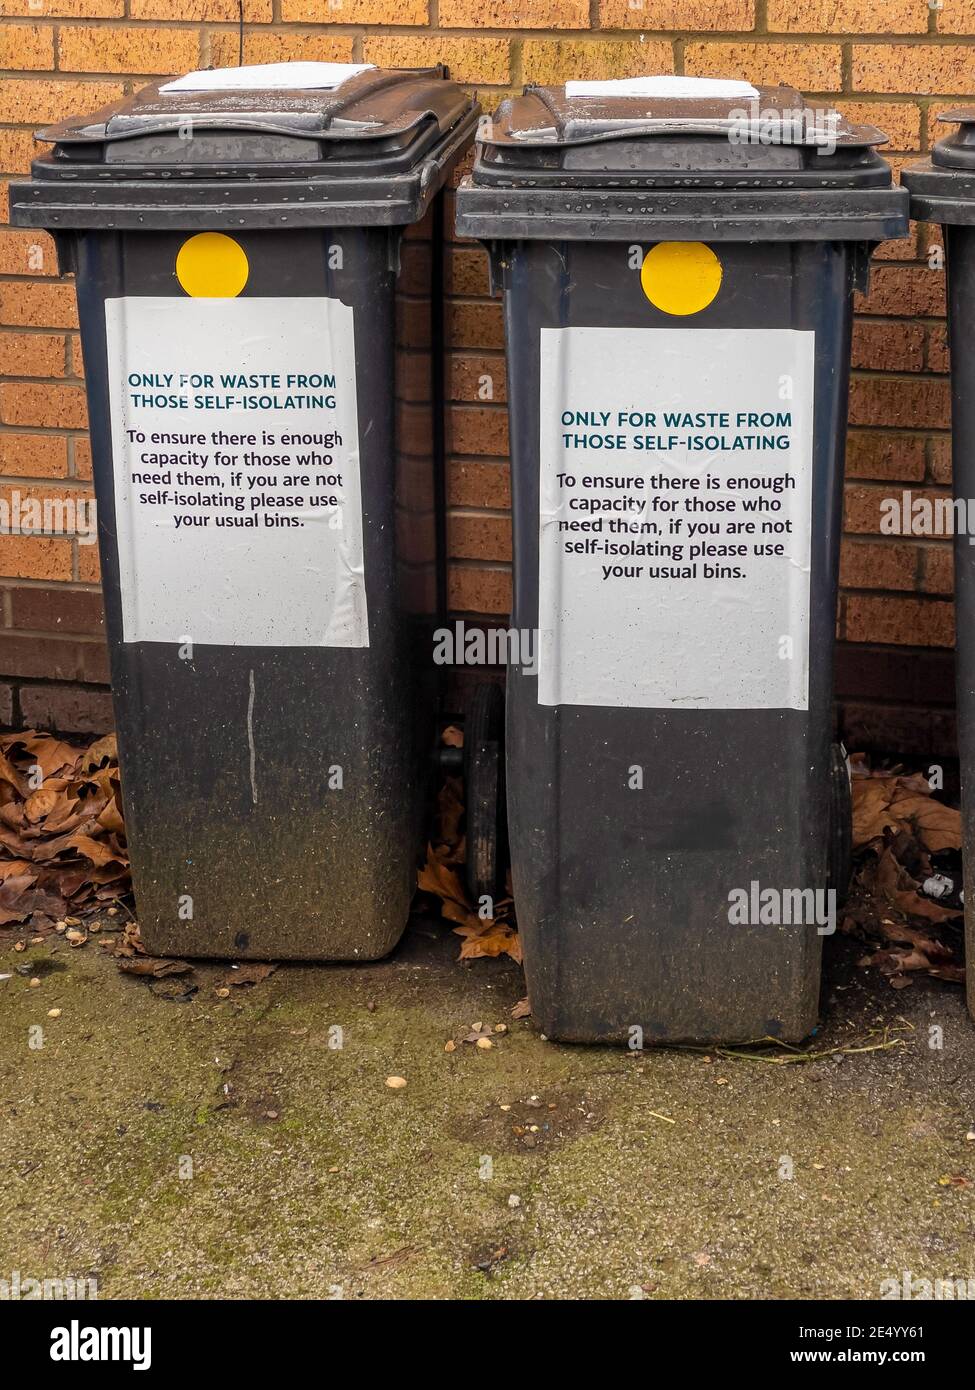 Wheely bins specifically for waste from people who are self isolating due to Covid-19 virus infection Stock Photo